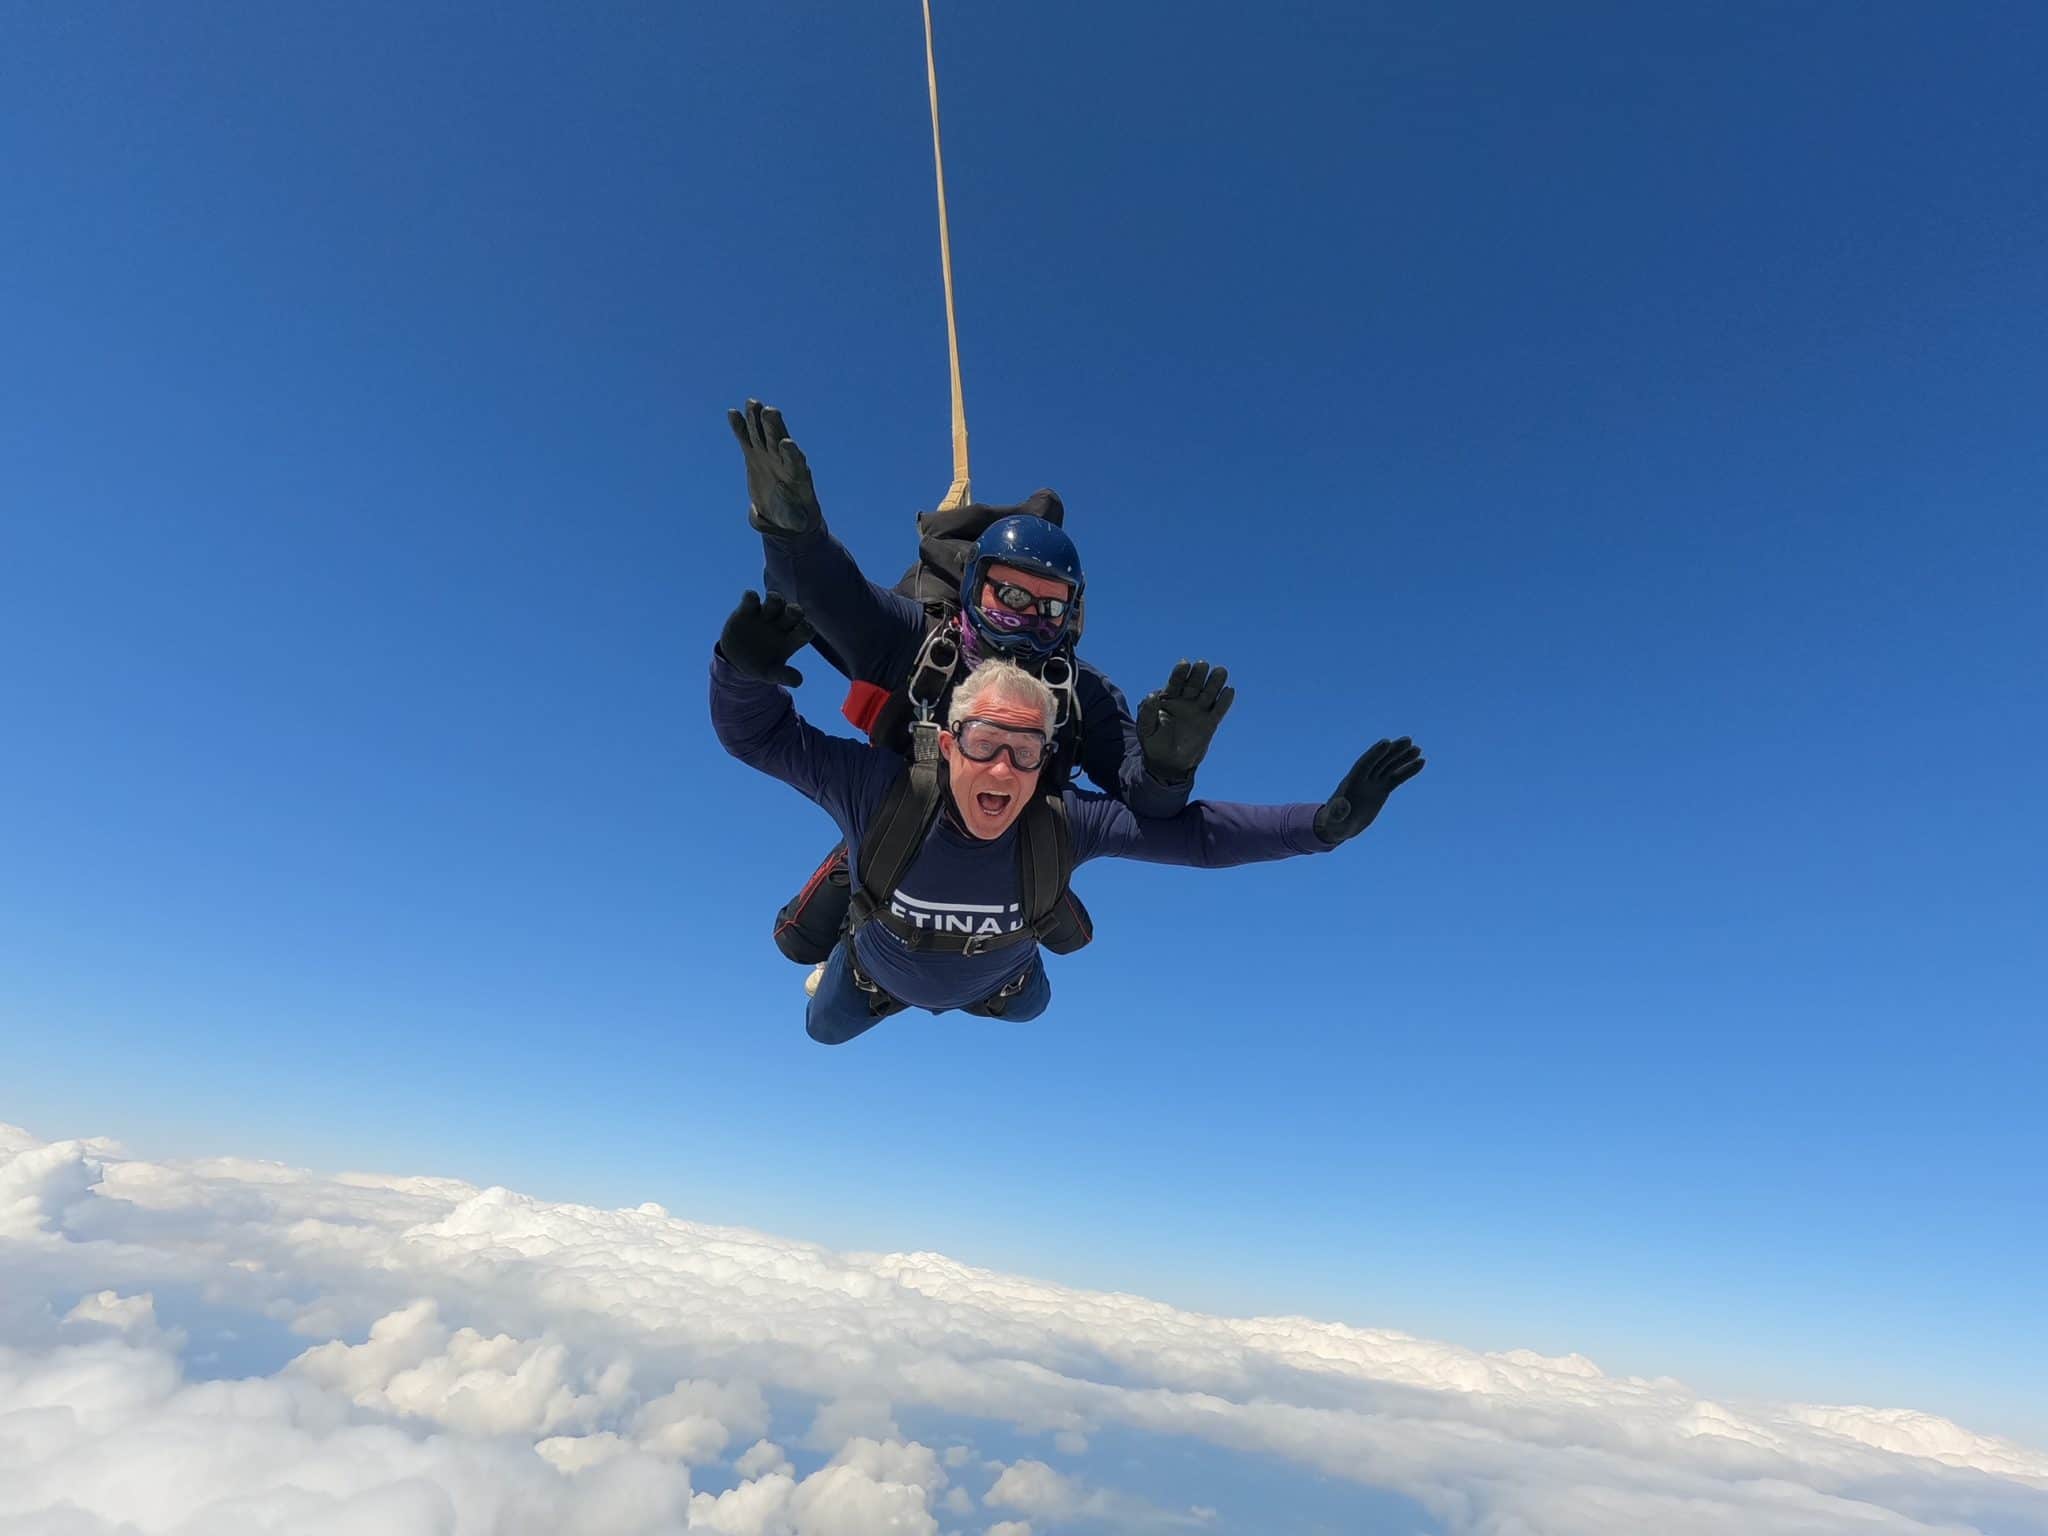 Image shows two people in a tandem skydive - blue sky and clouds are visible.